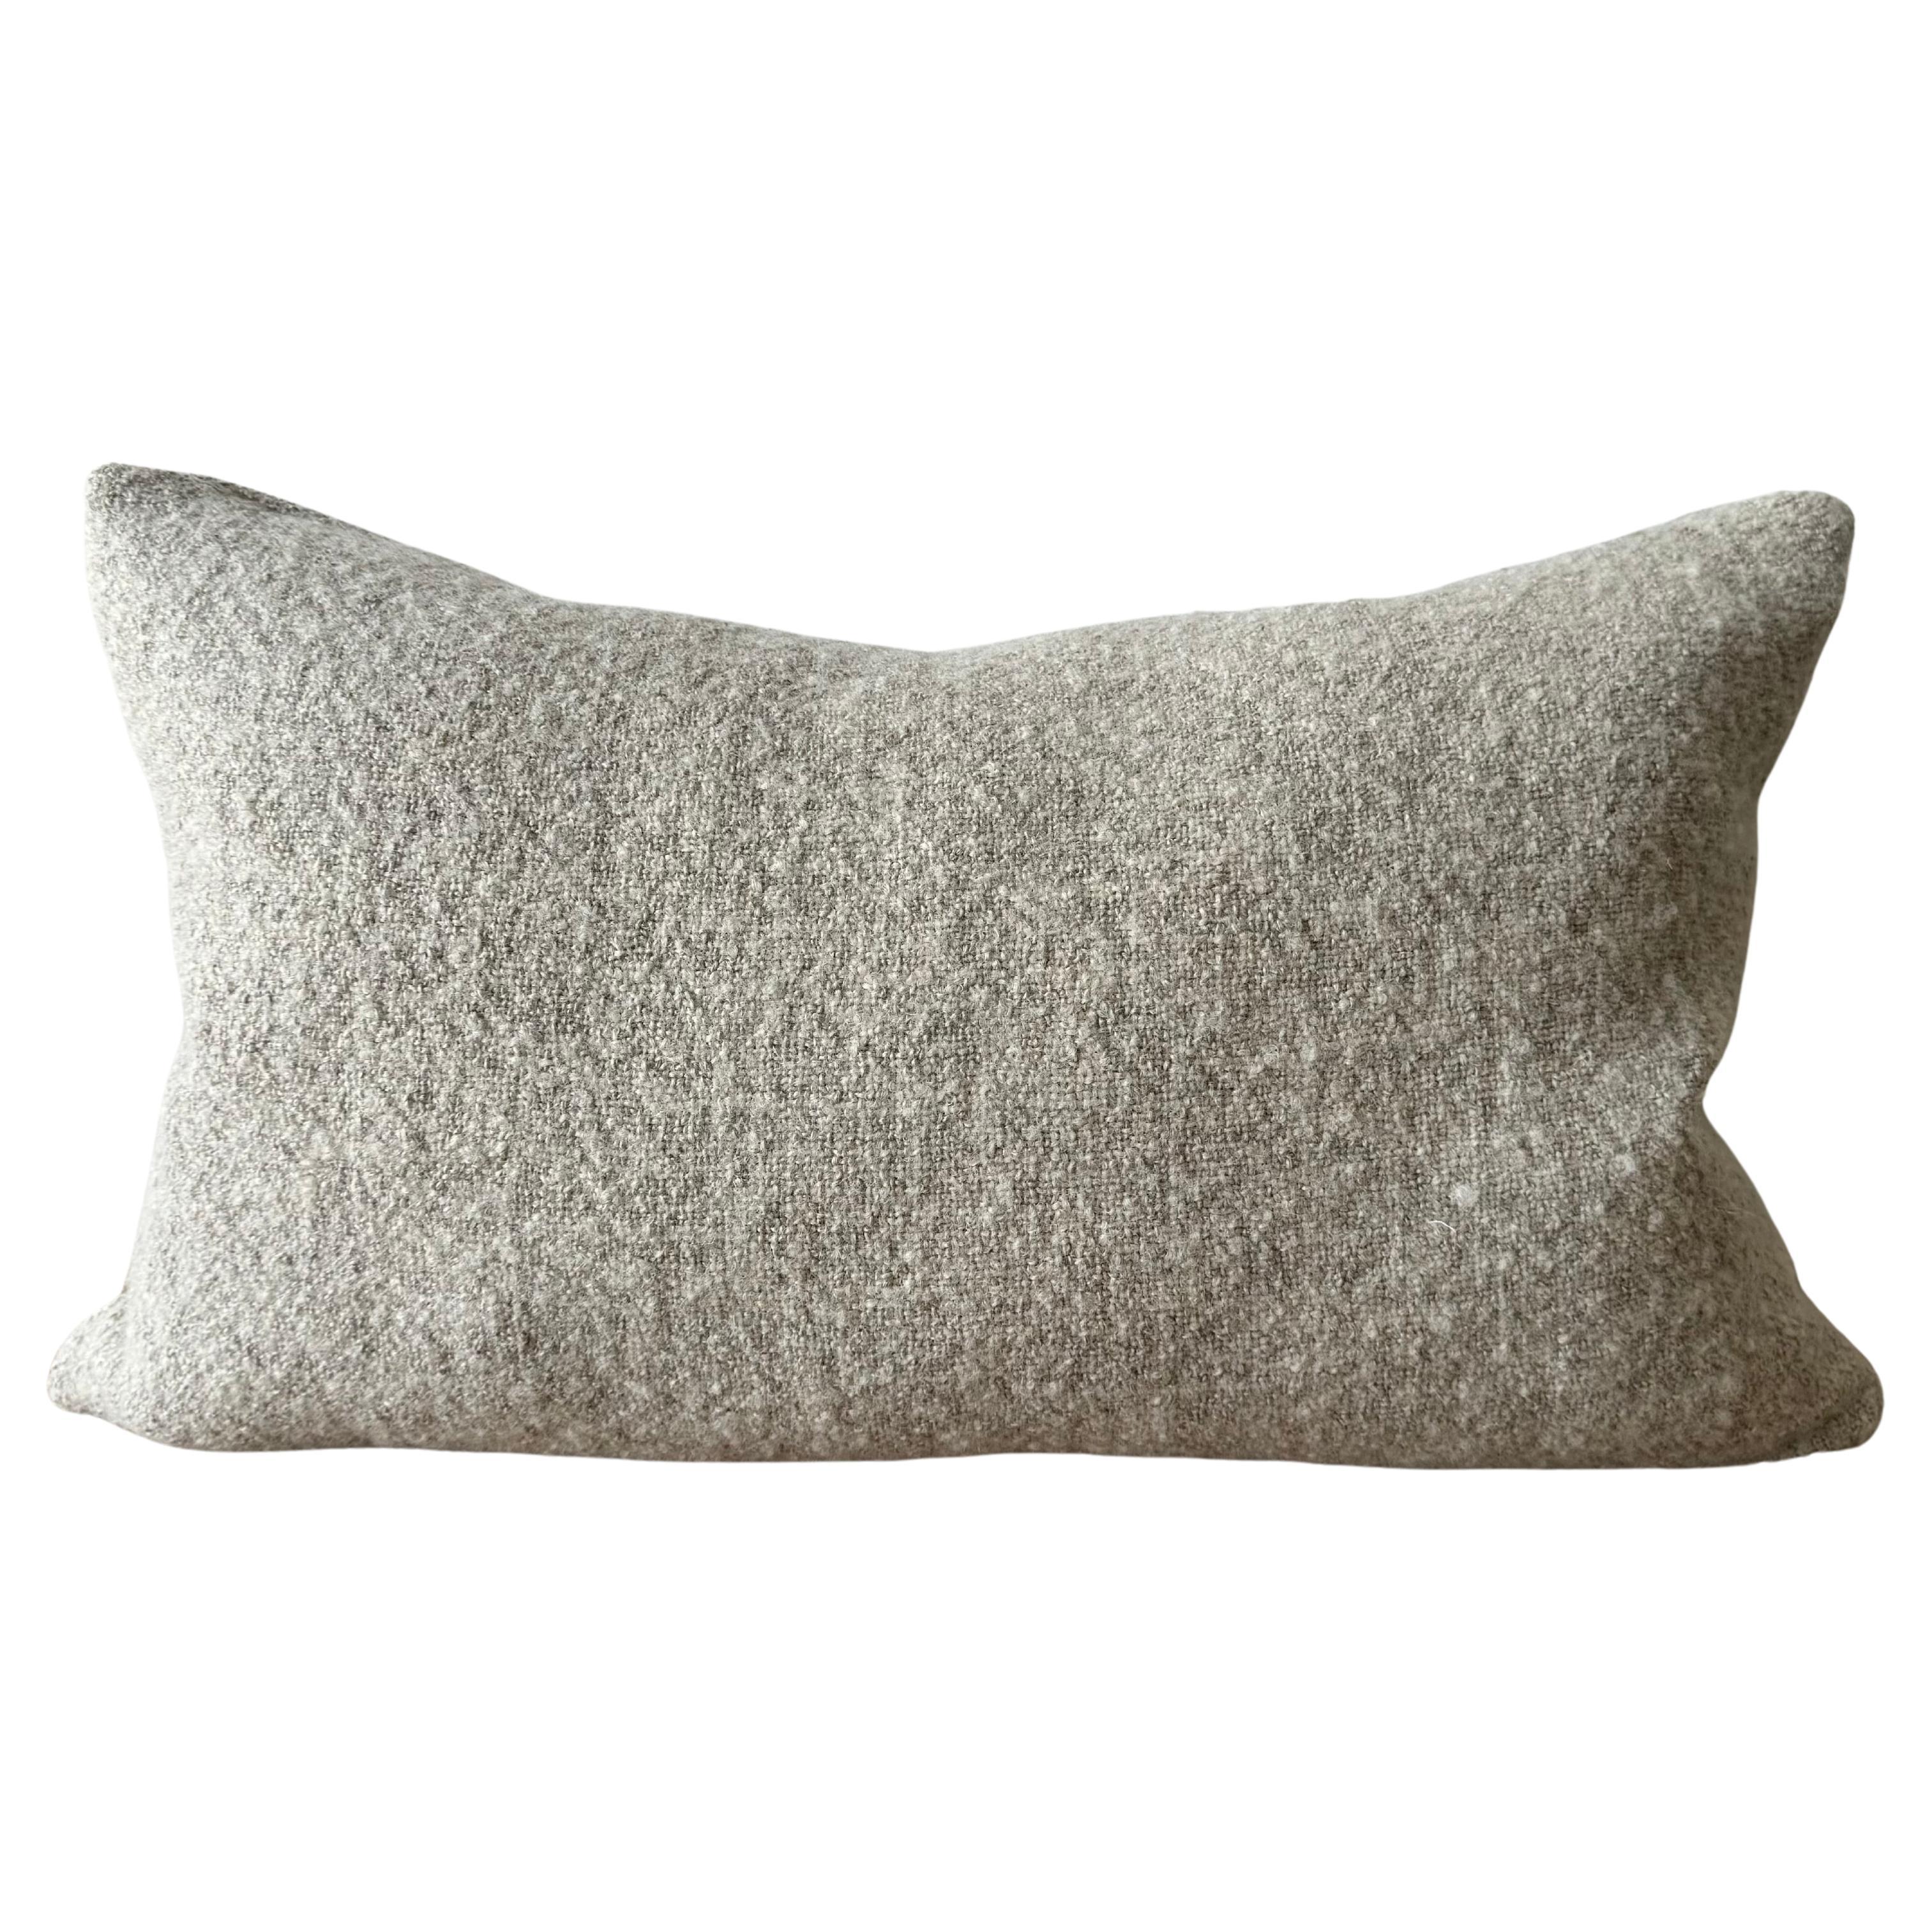 Custom Linen and Wool Lumbar Pillow in Flax with Down Feather Insert For Sale